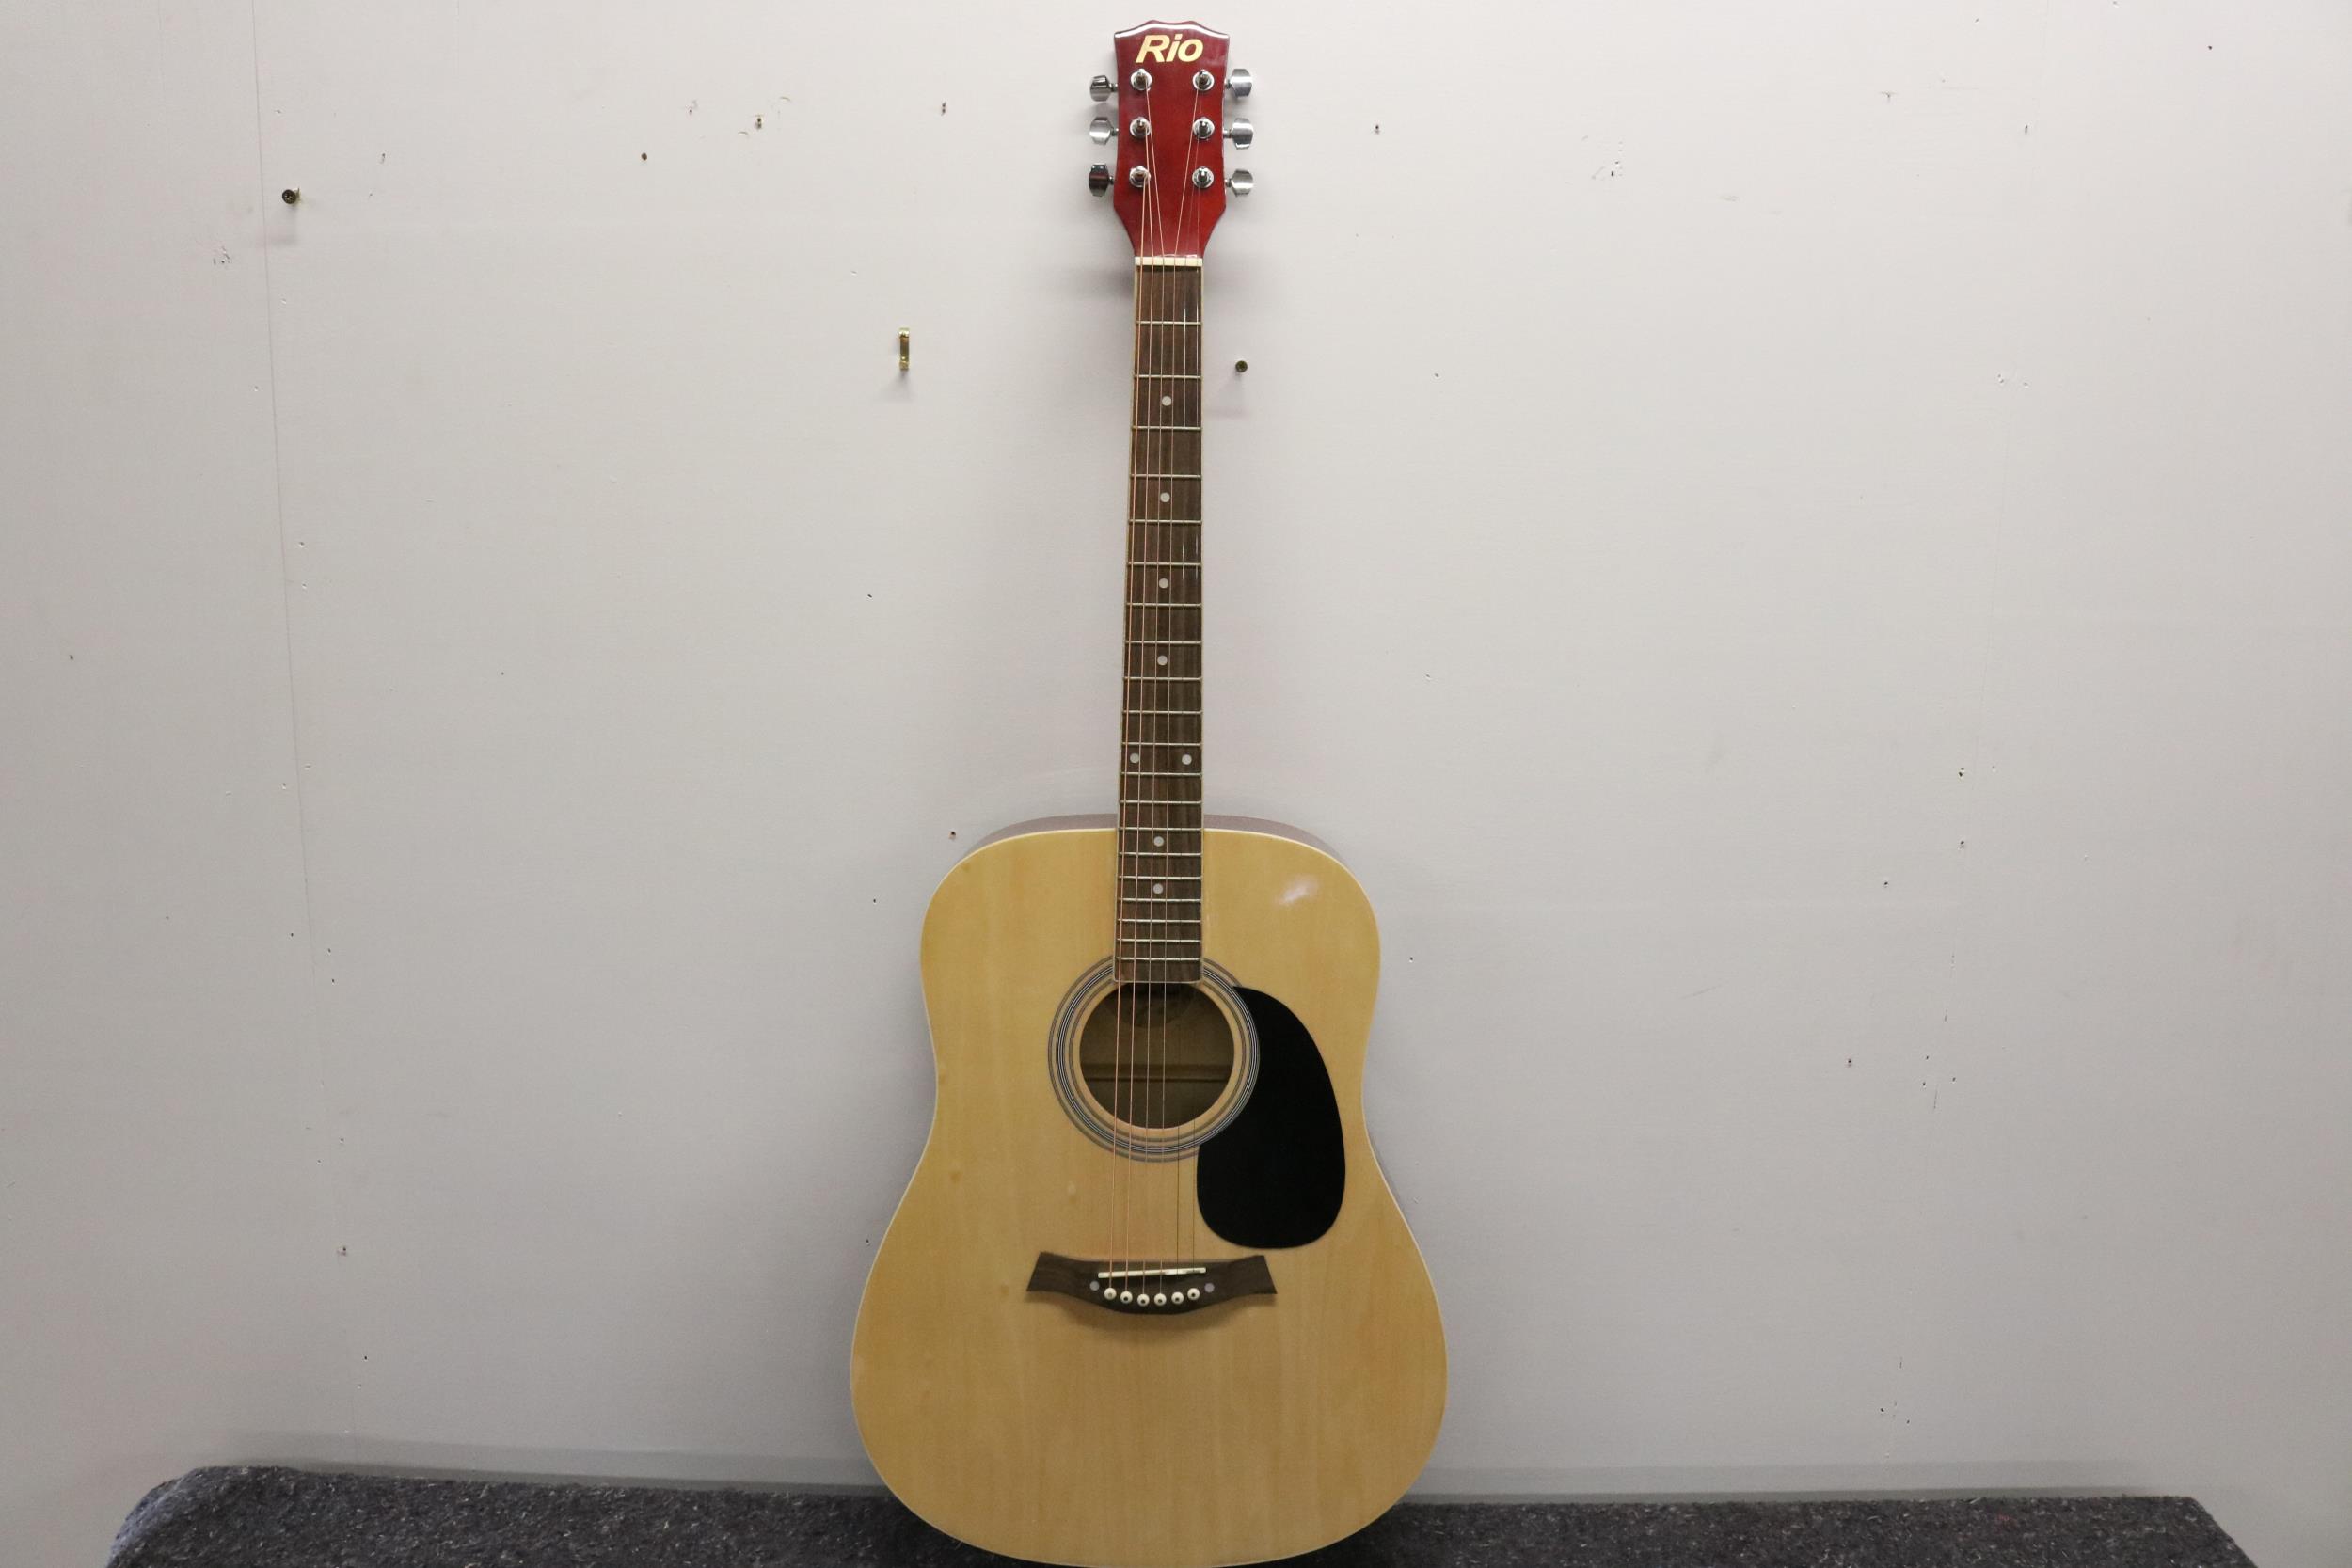 Rio Acoustic Guitar Natural Finish Ideal Beginners